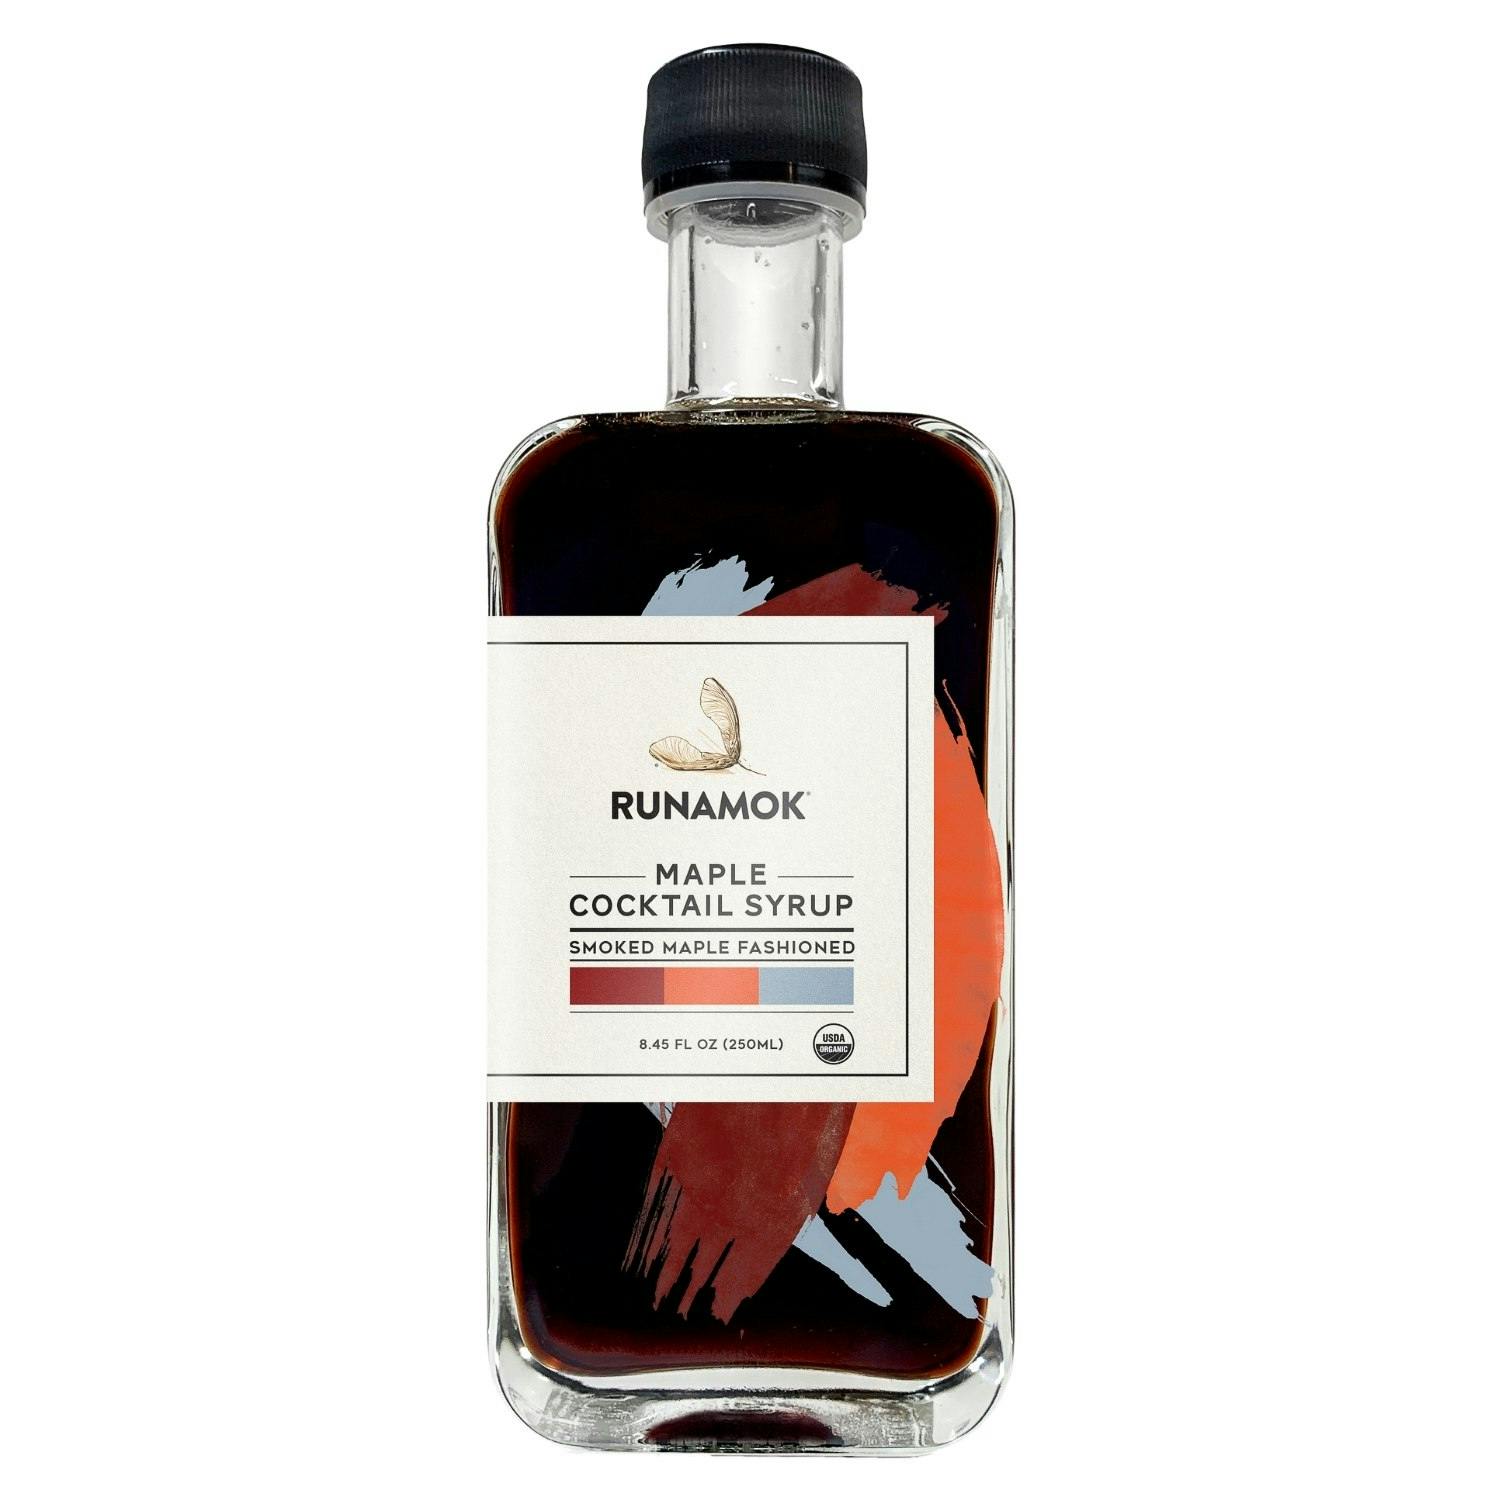 Smoked Maple Old Fashioned Cocktail Syrup